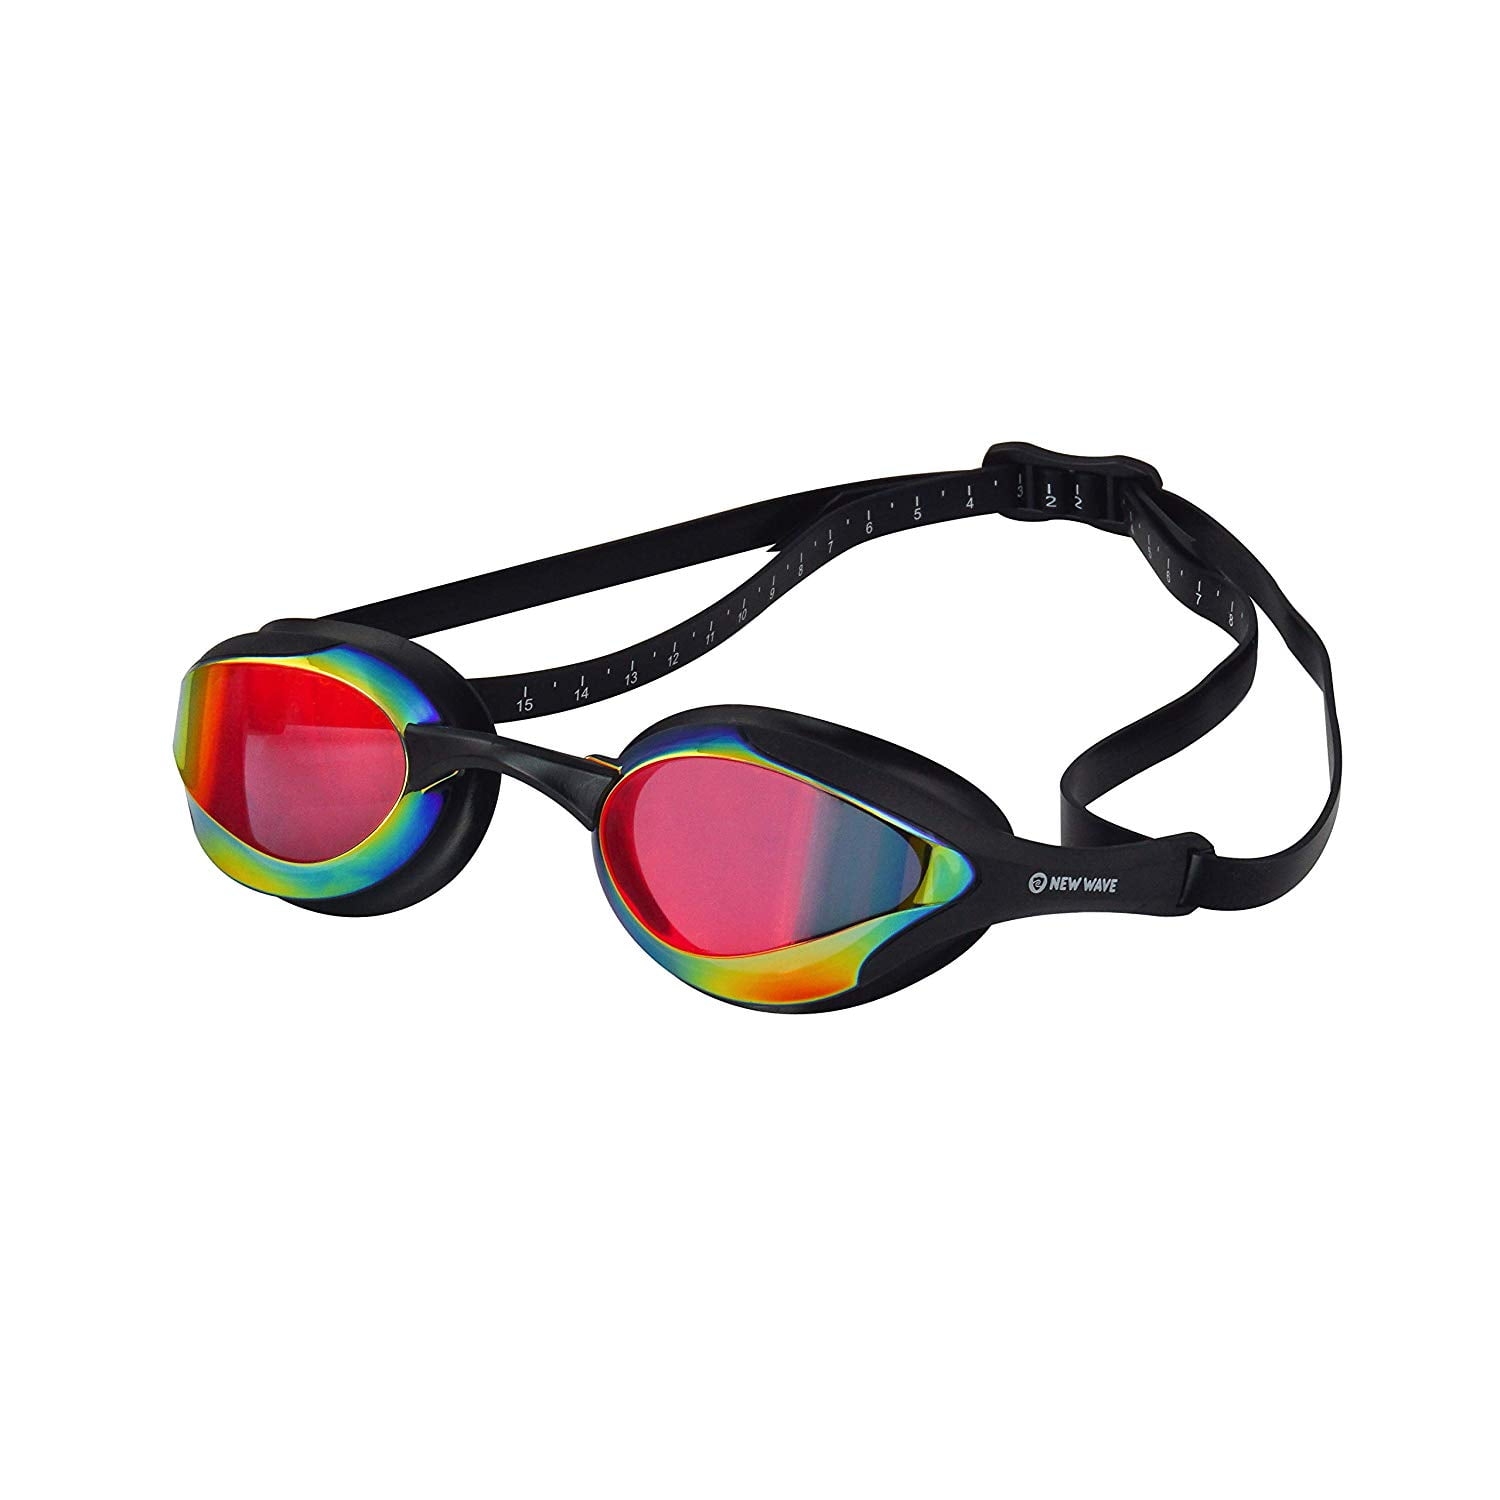 Comfortable No Leaking for Kids Children Ages 7-15#30920 Anti-Fog UV Protection Barracuda Junior Swim Goggle Titanium JR One-Piece Frame Soft Seals Silicone Strap Easy Adjustment